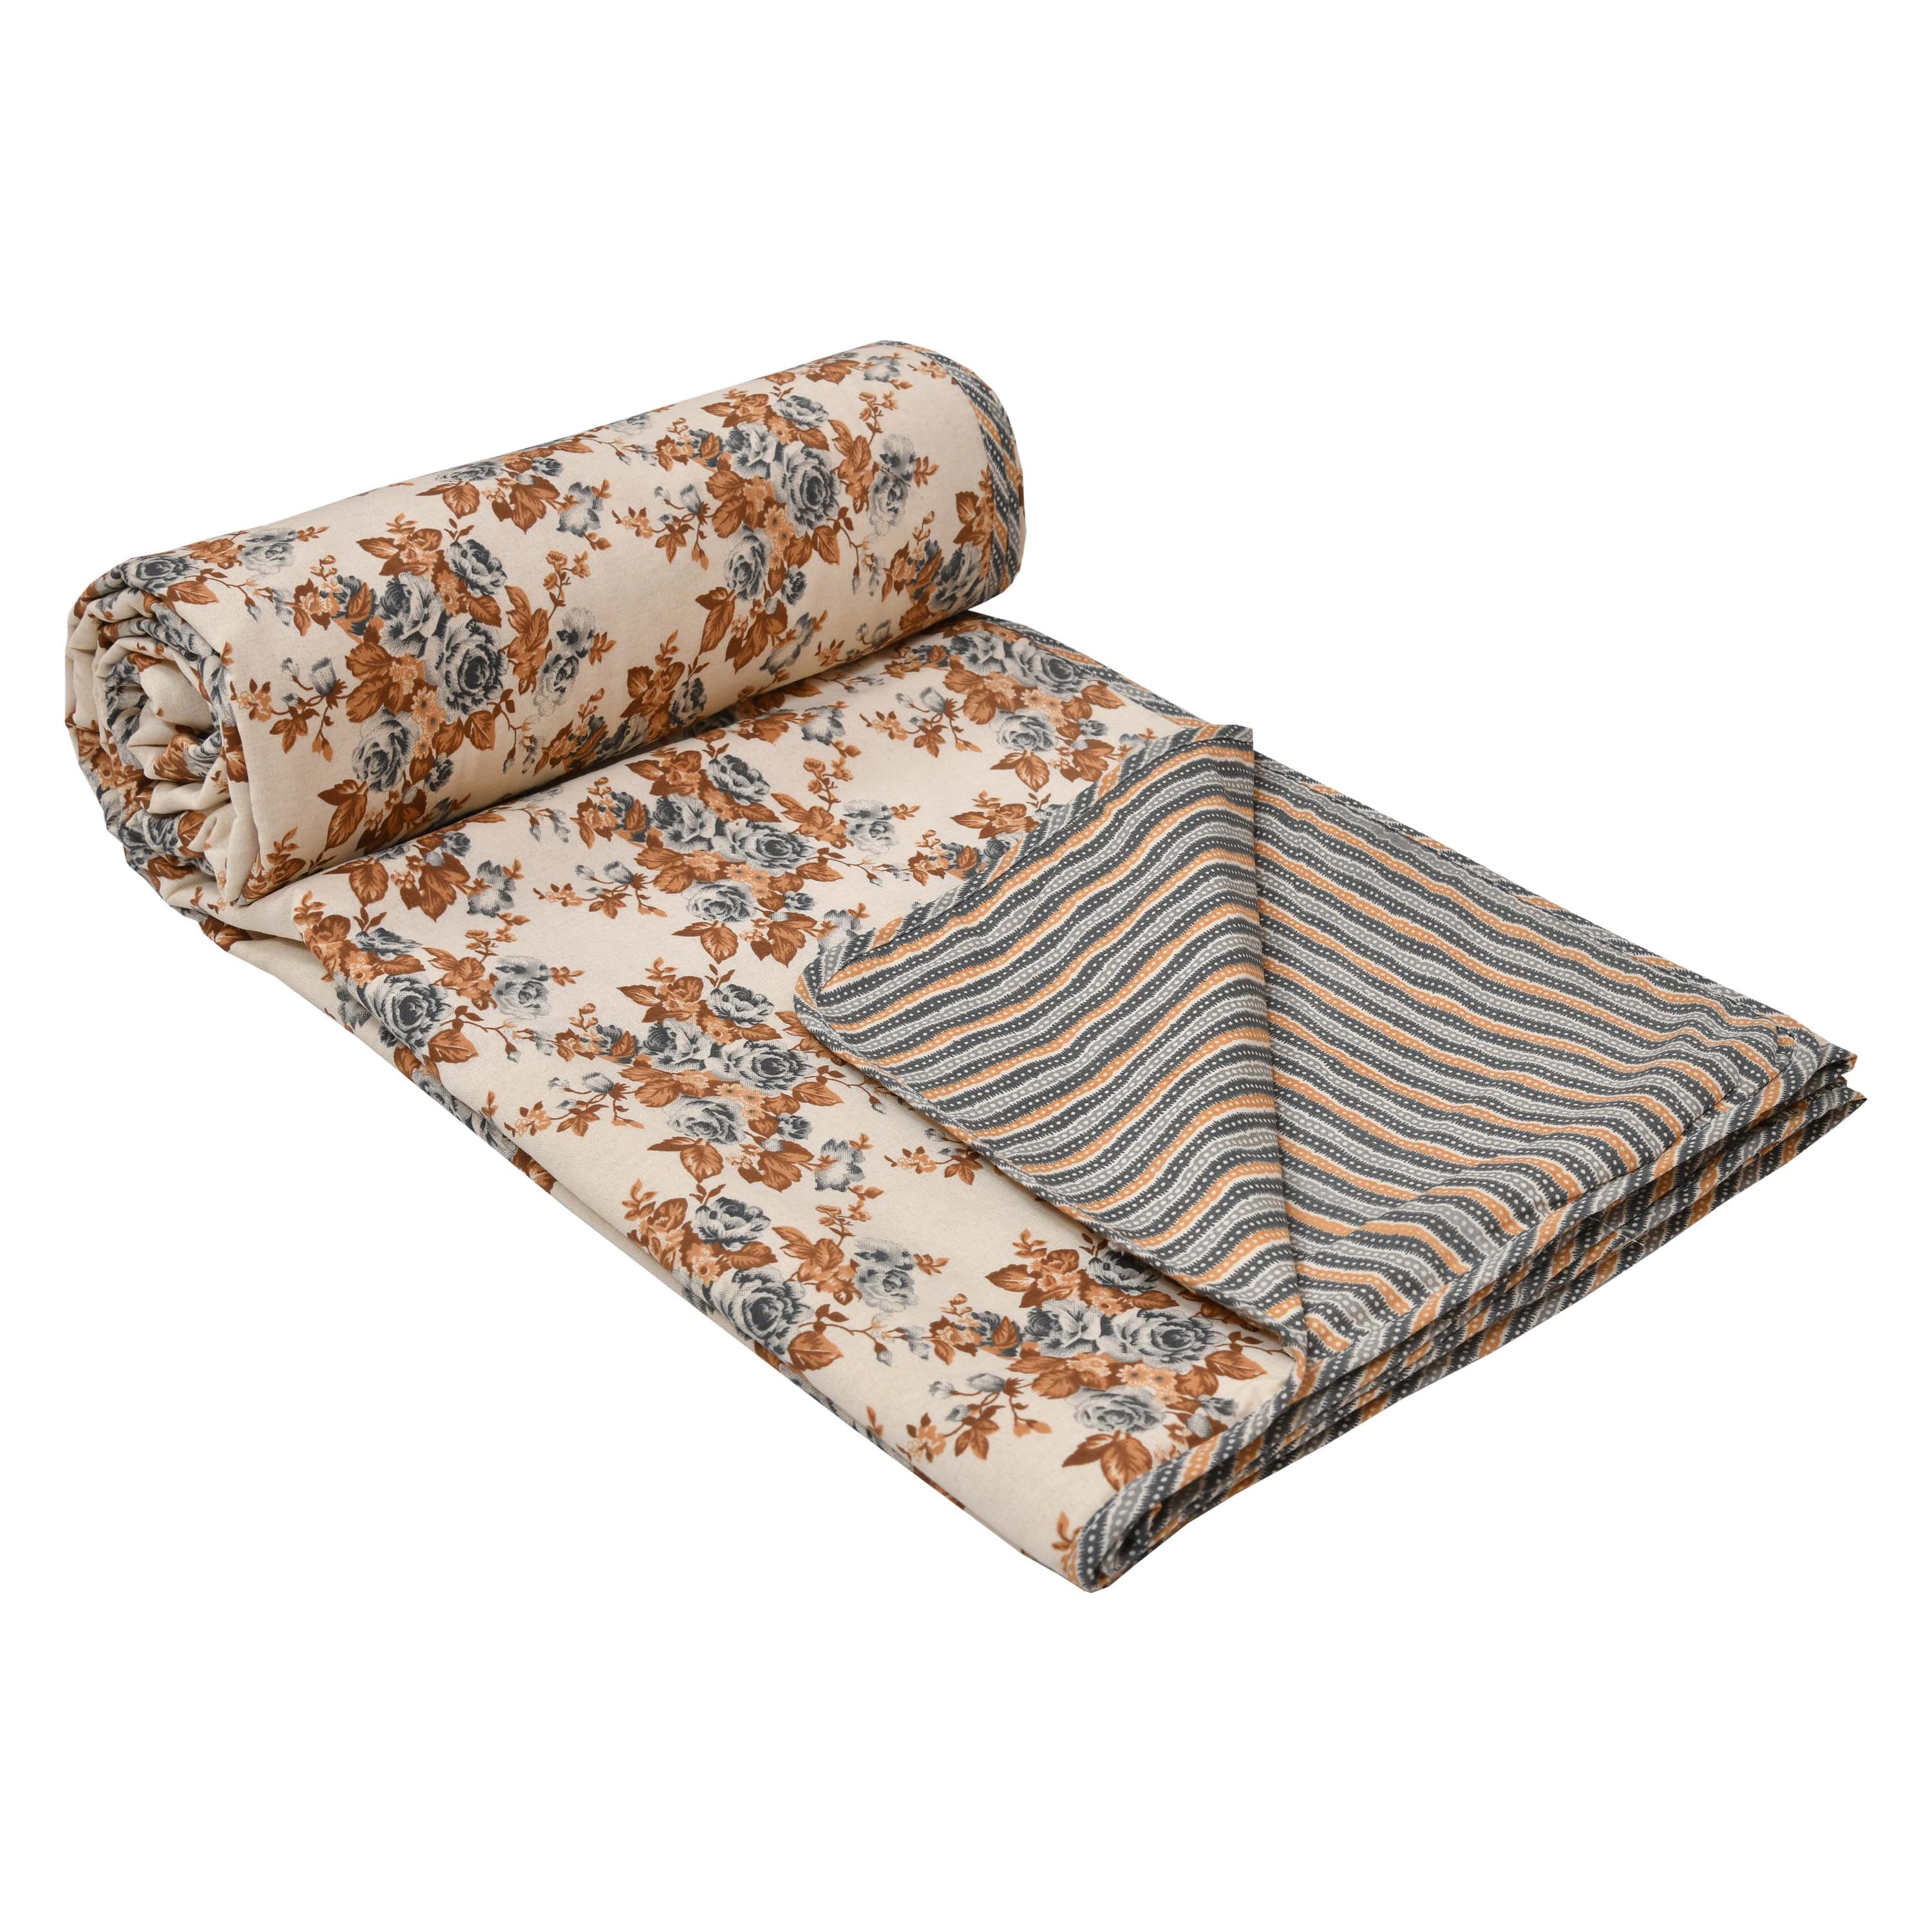 Dohar Cotton-Double Bed- Rose Bouquet Yellow N Gray